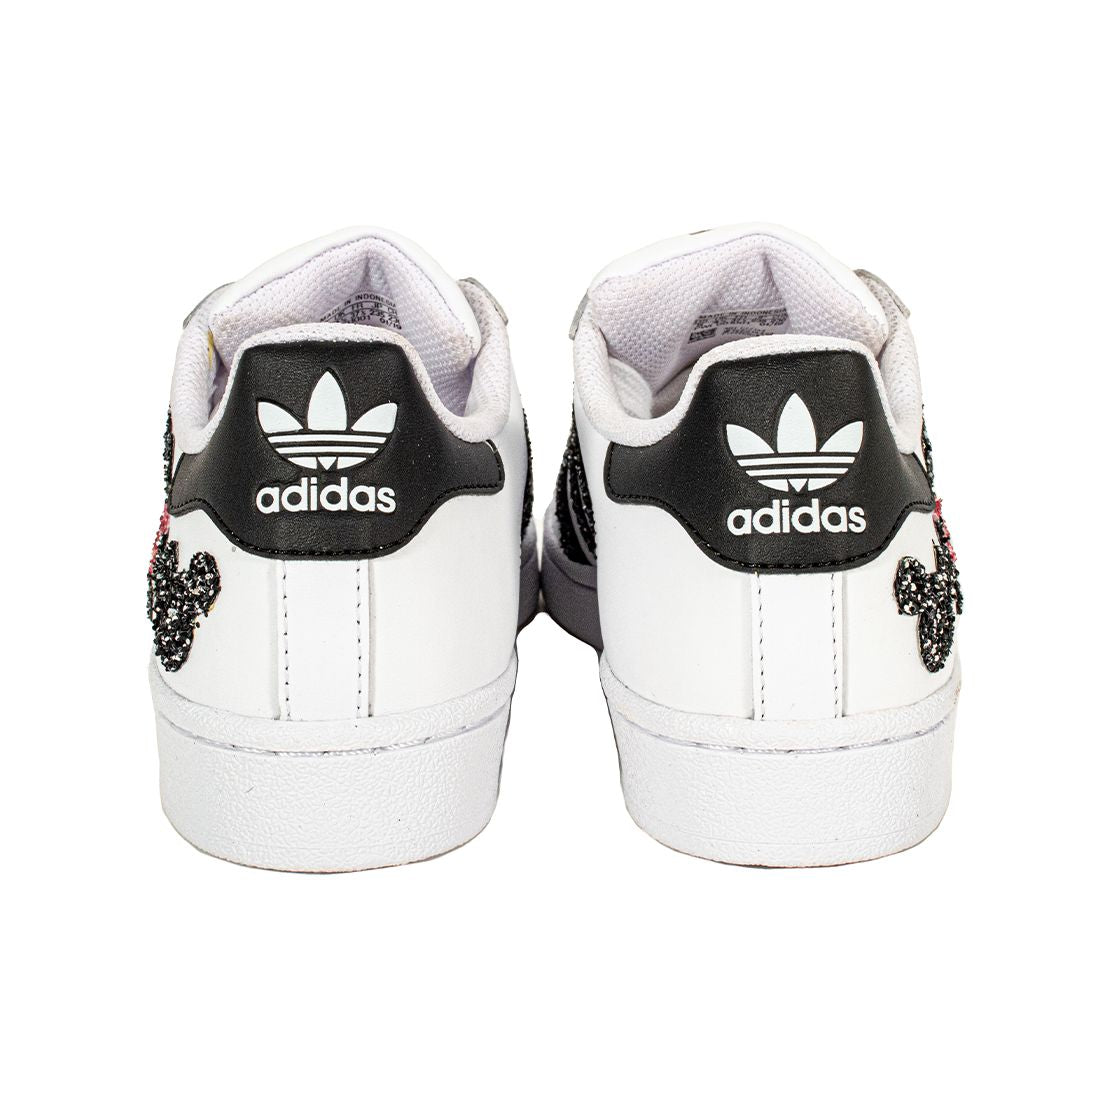 ADIDAS SUPERSTAR PERSONALIZZATE MICKY+MINNY